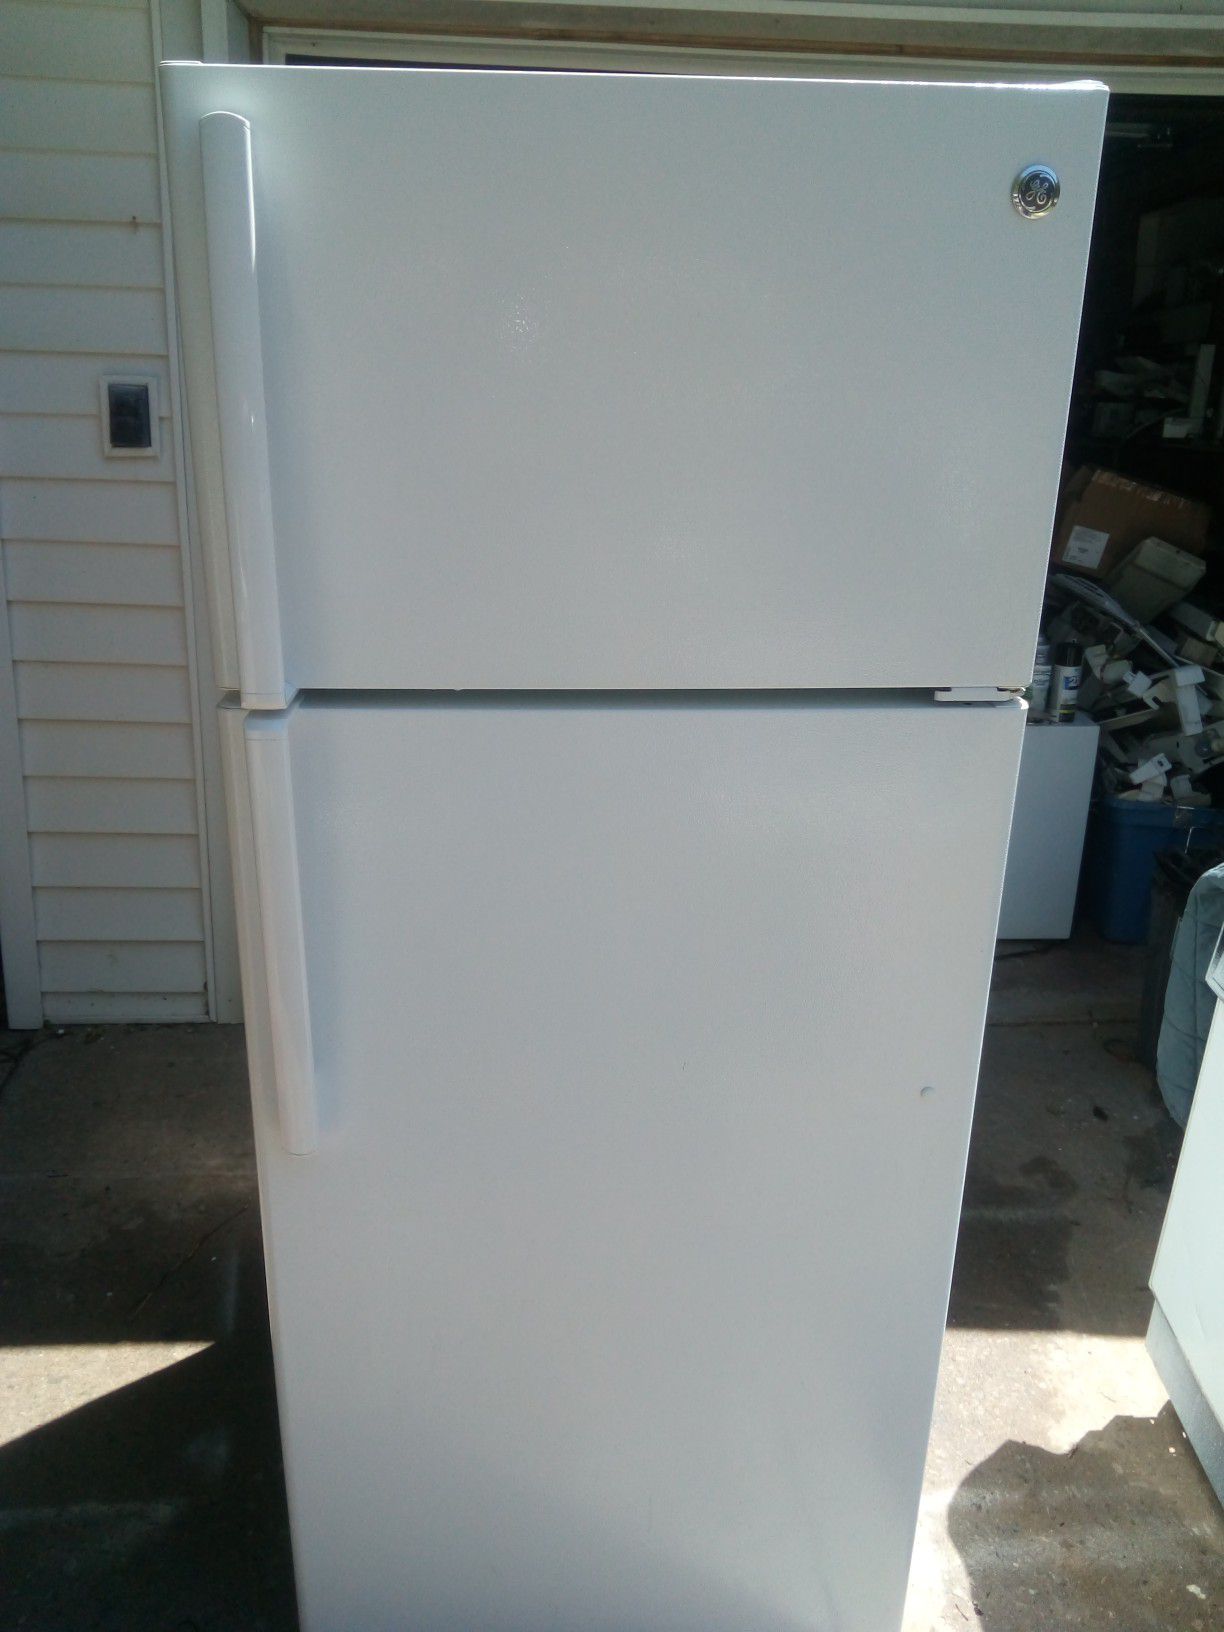 GE refrigerator, White call me wolf ice maker, 18 cubic